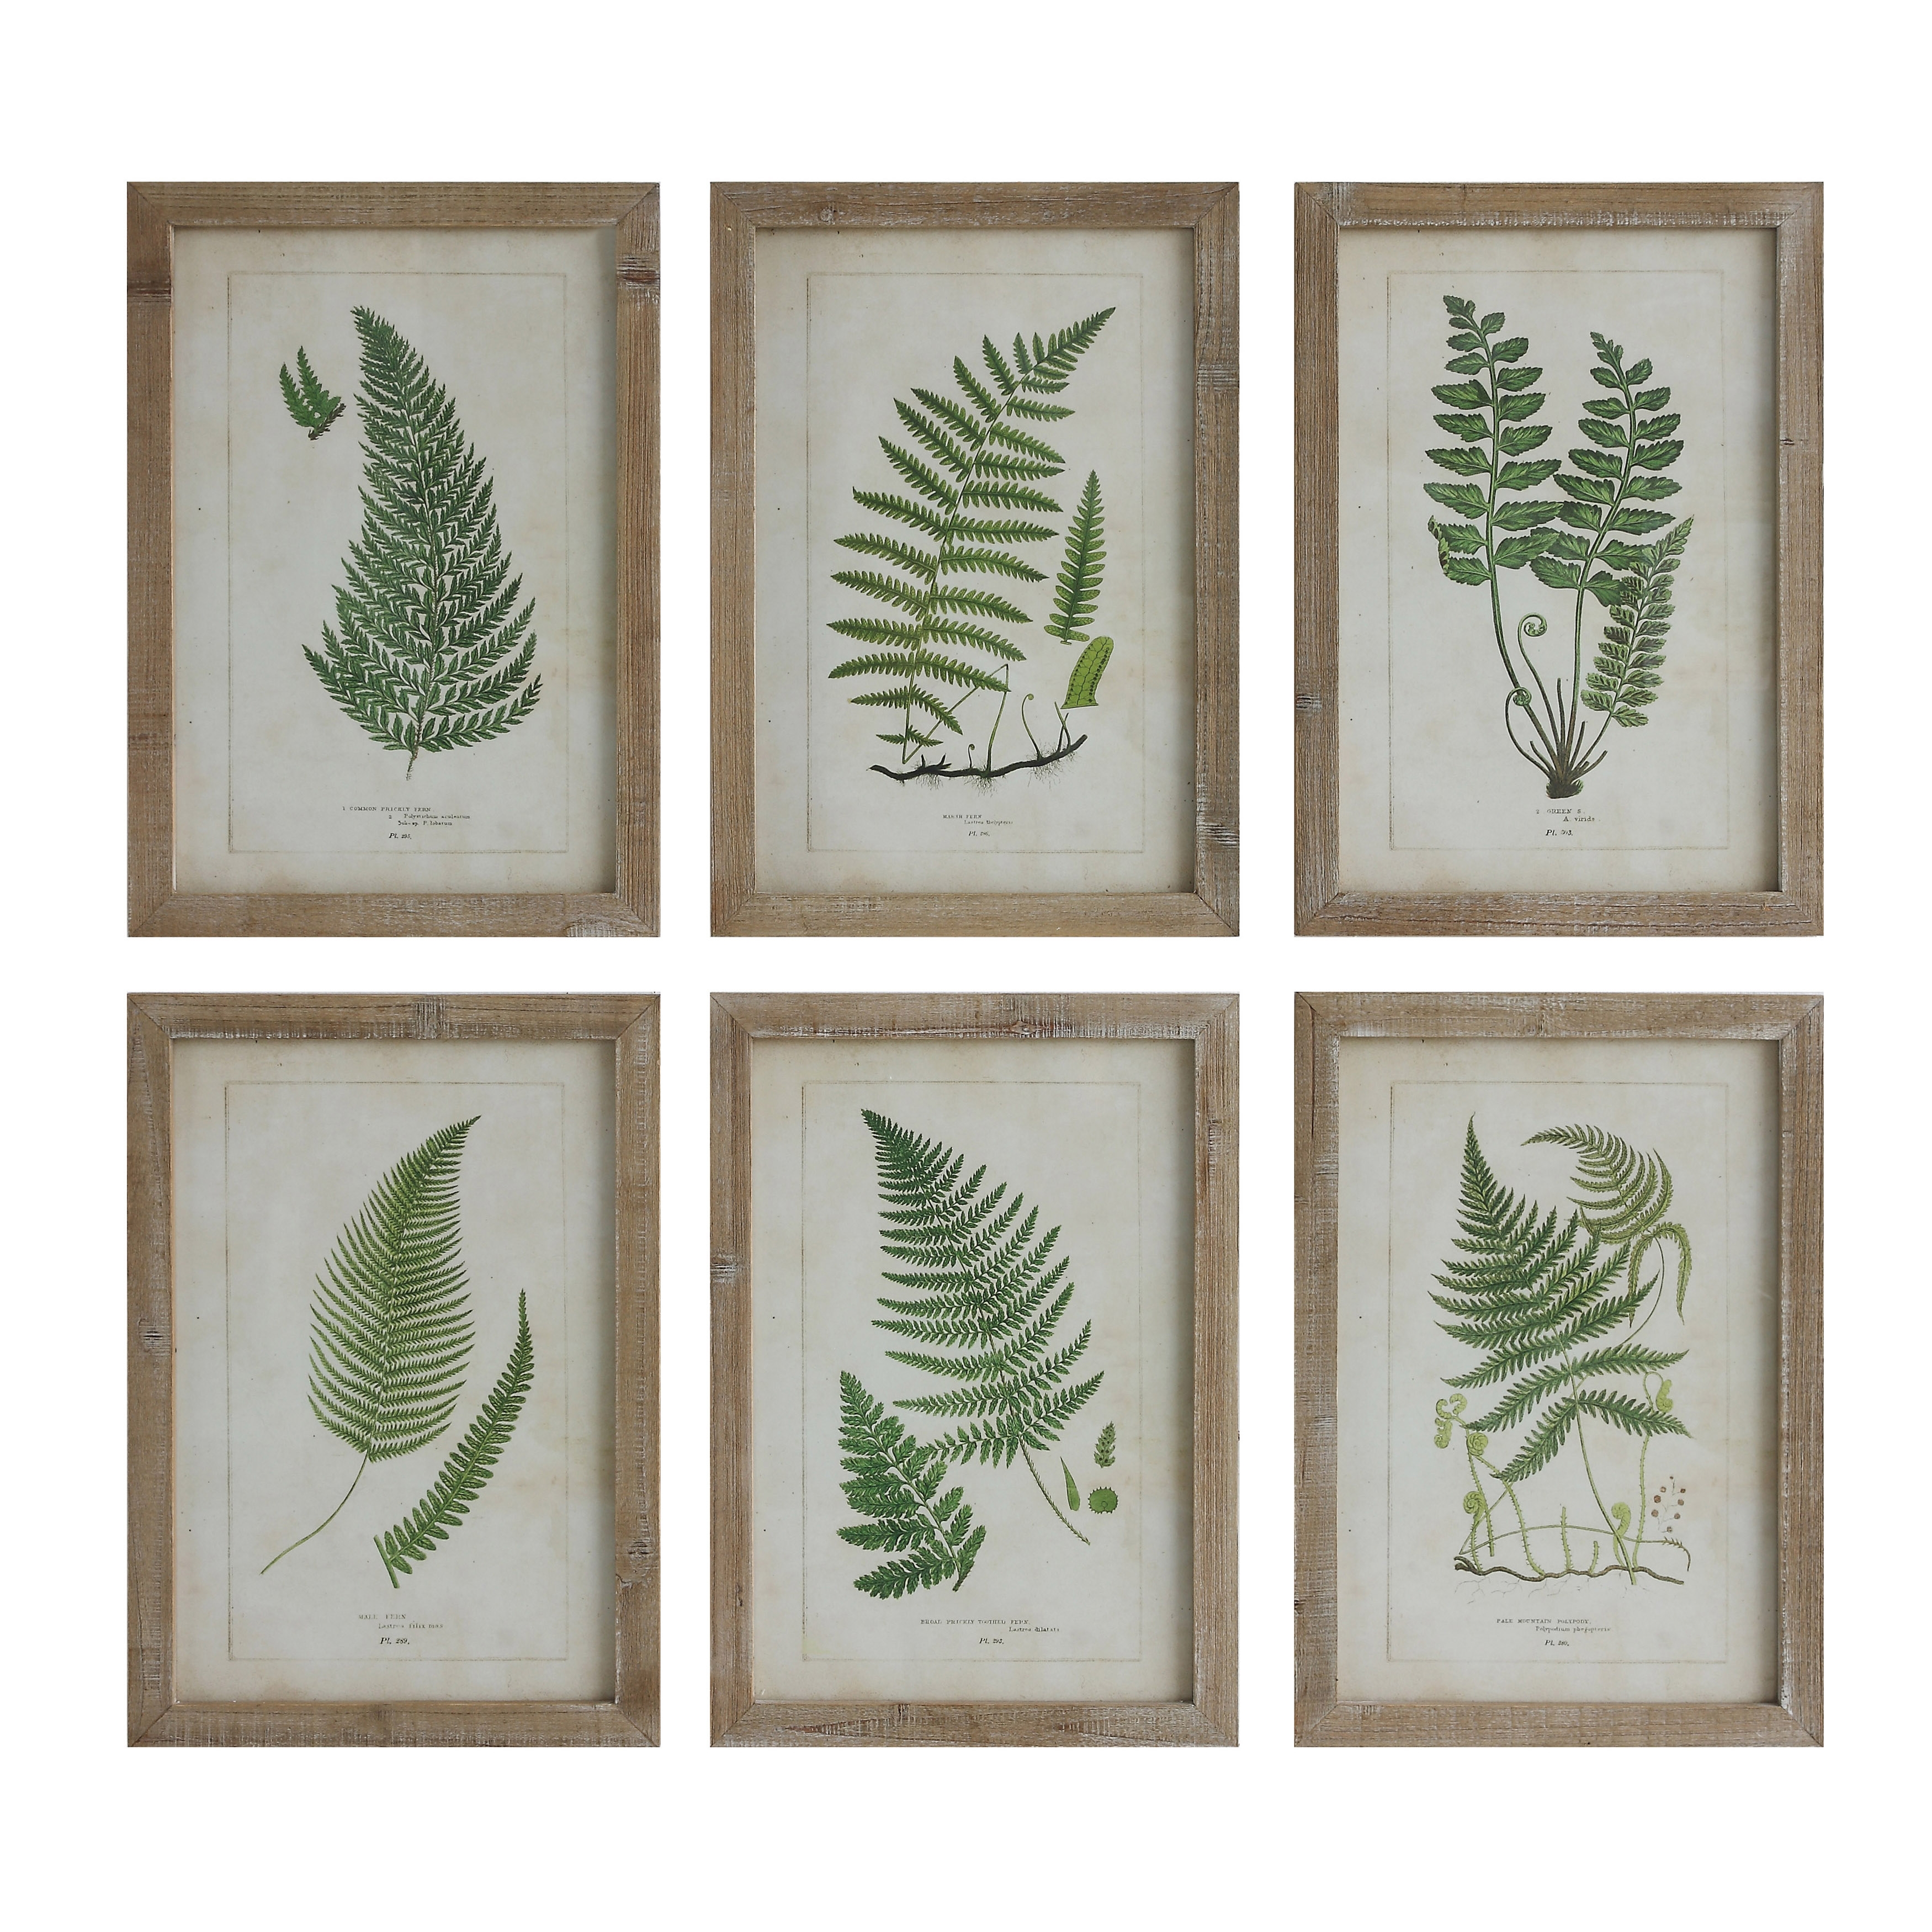 Wood Framed Wall Décor with Fern Fronds (Set of 6 Designs) - Image 0